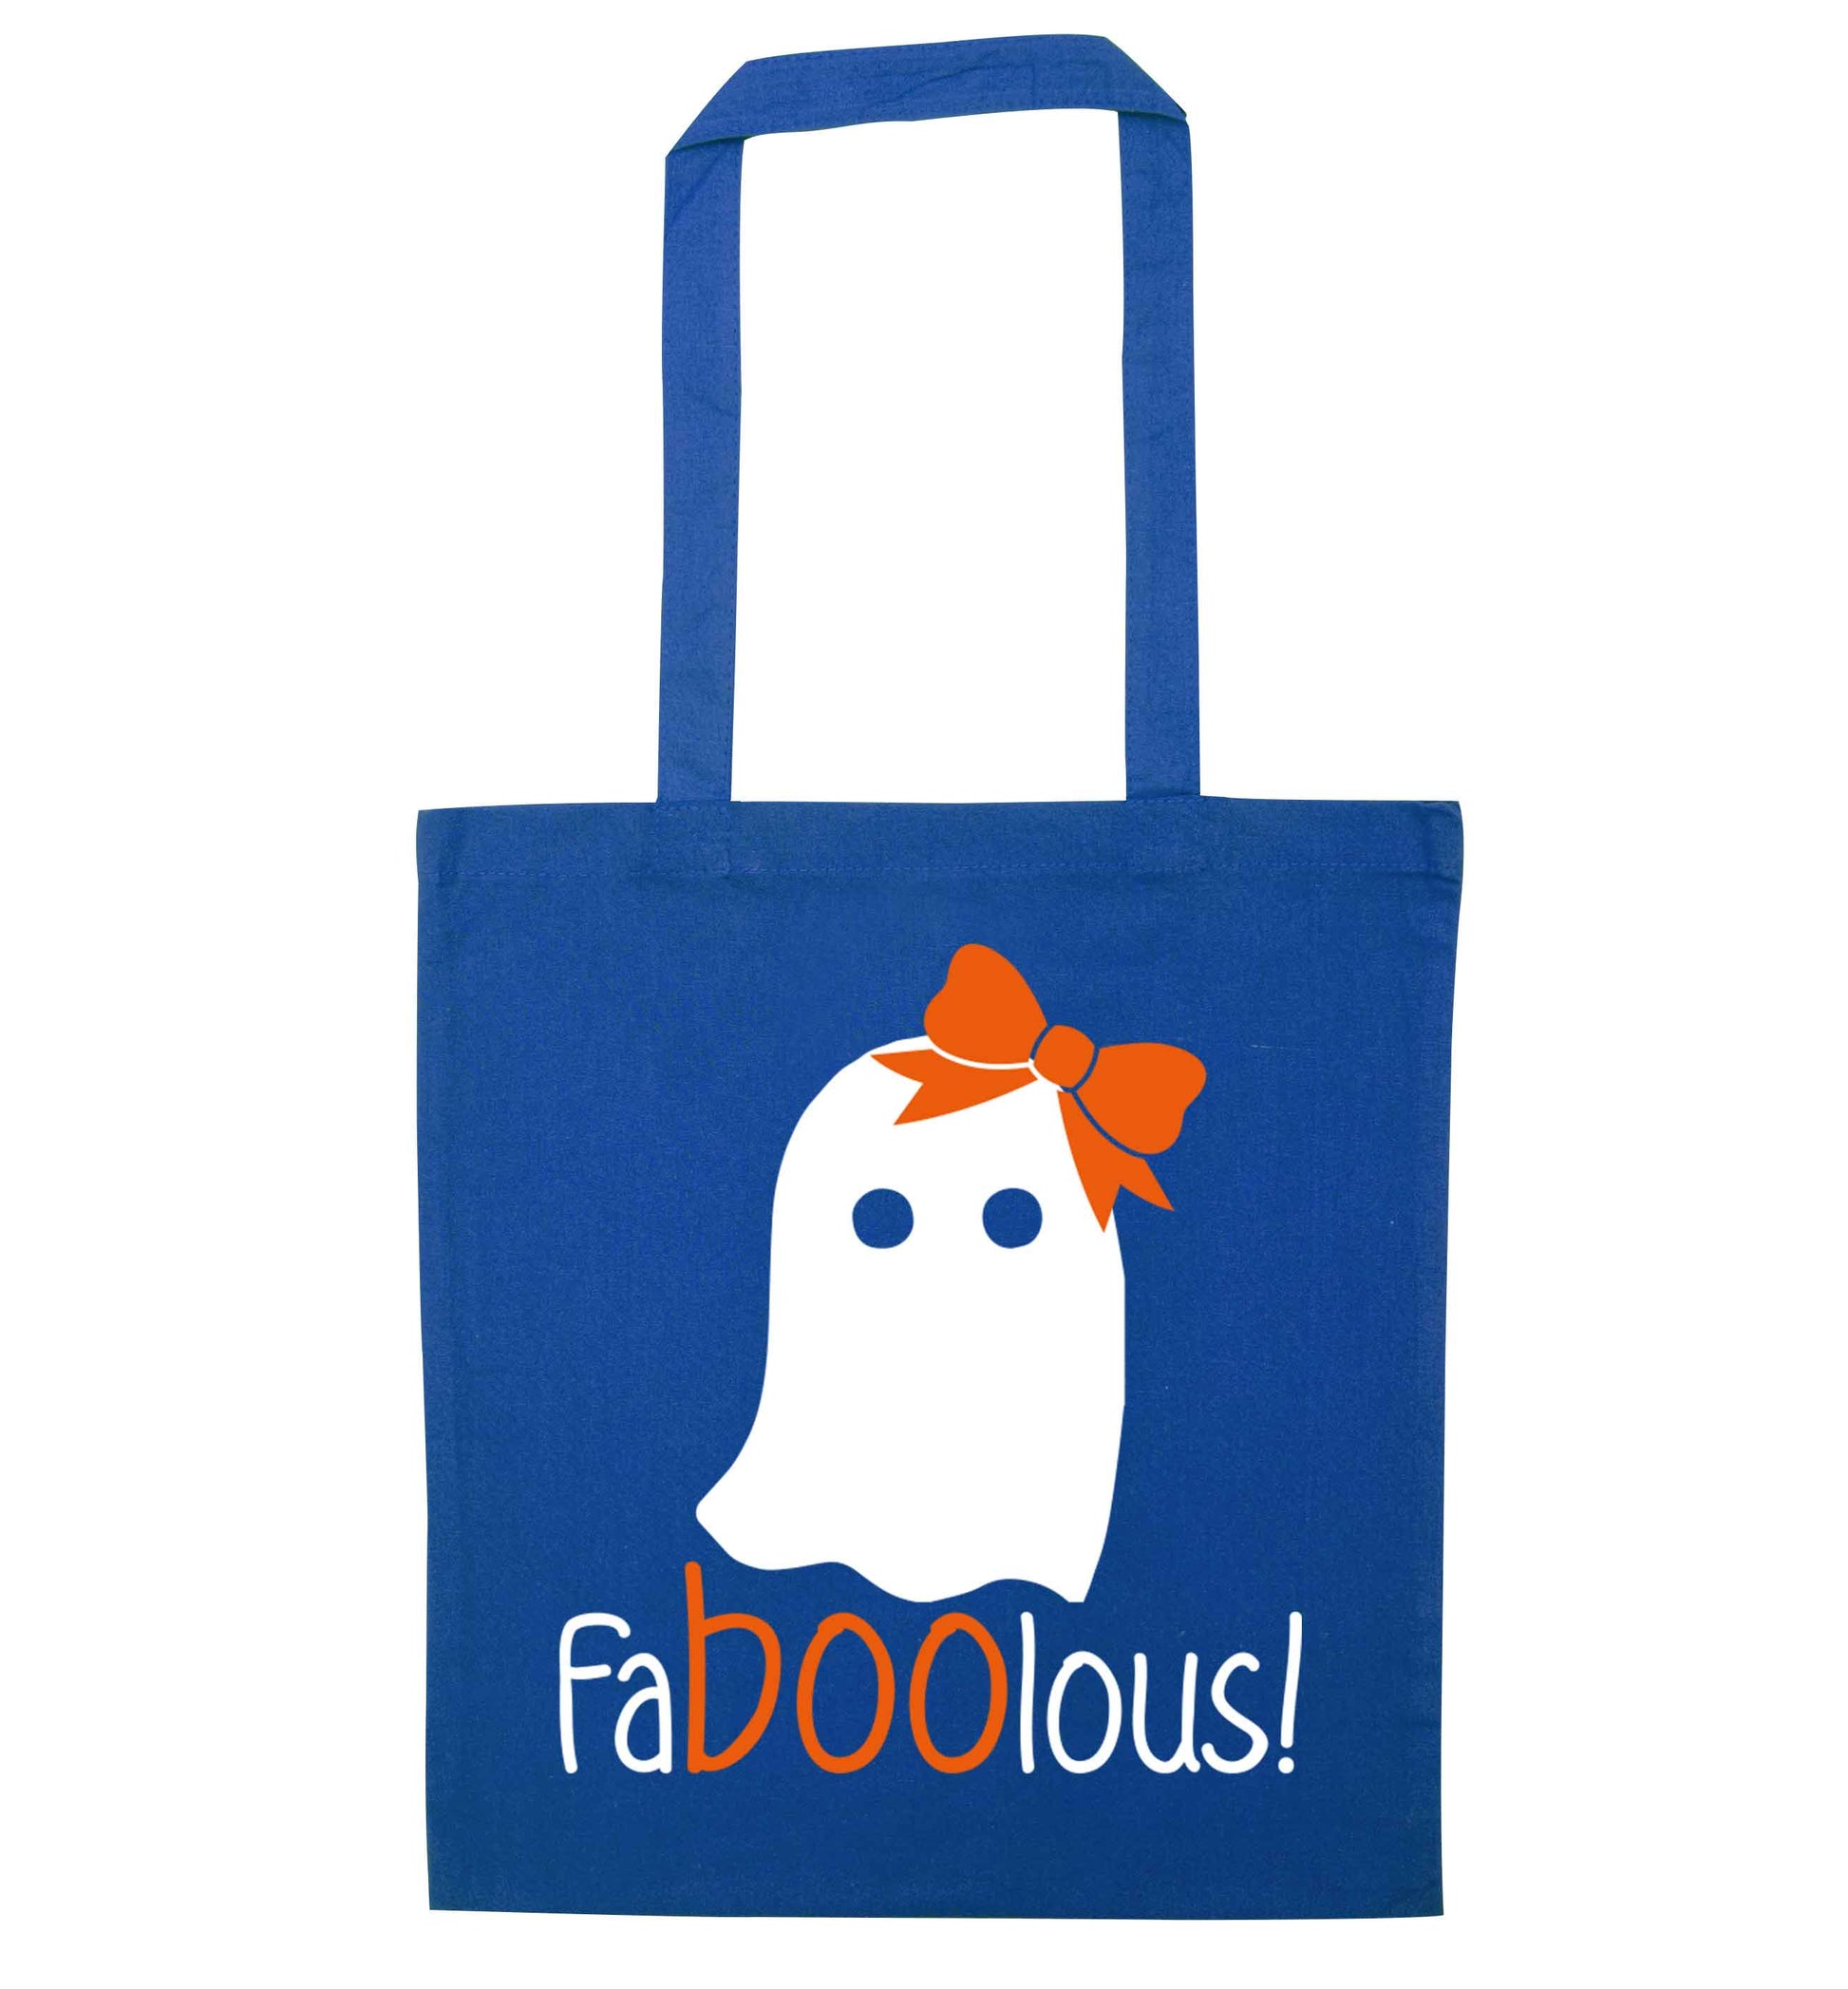 Faboolous ghost blue tote bag